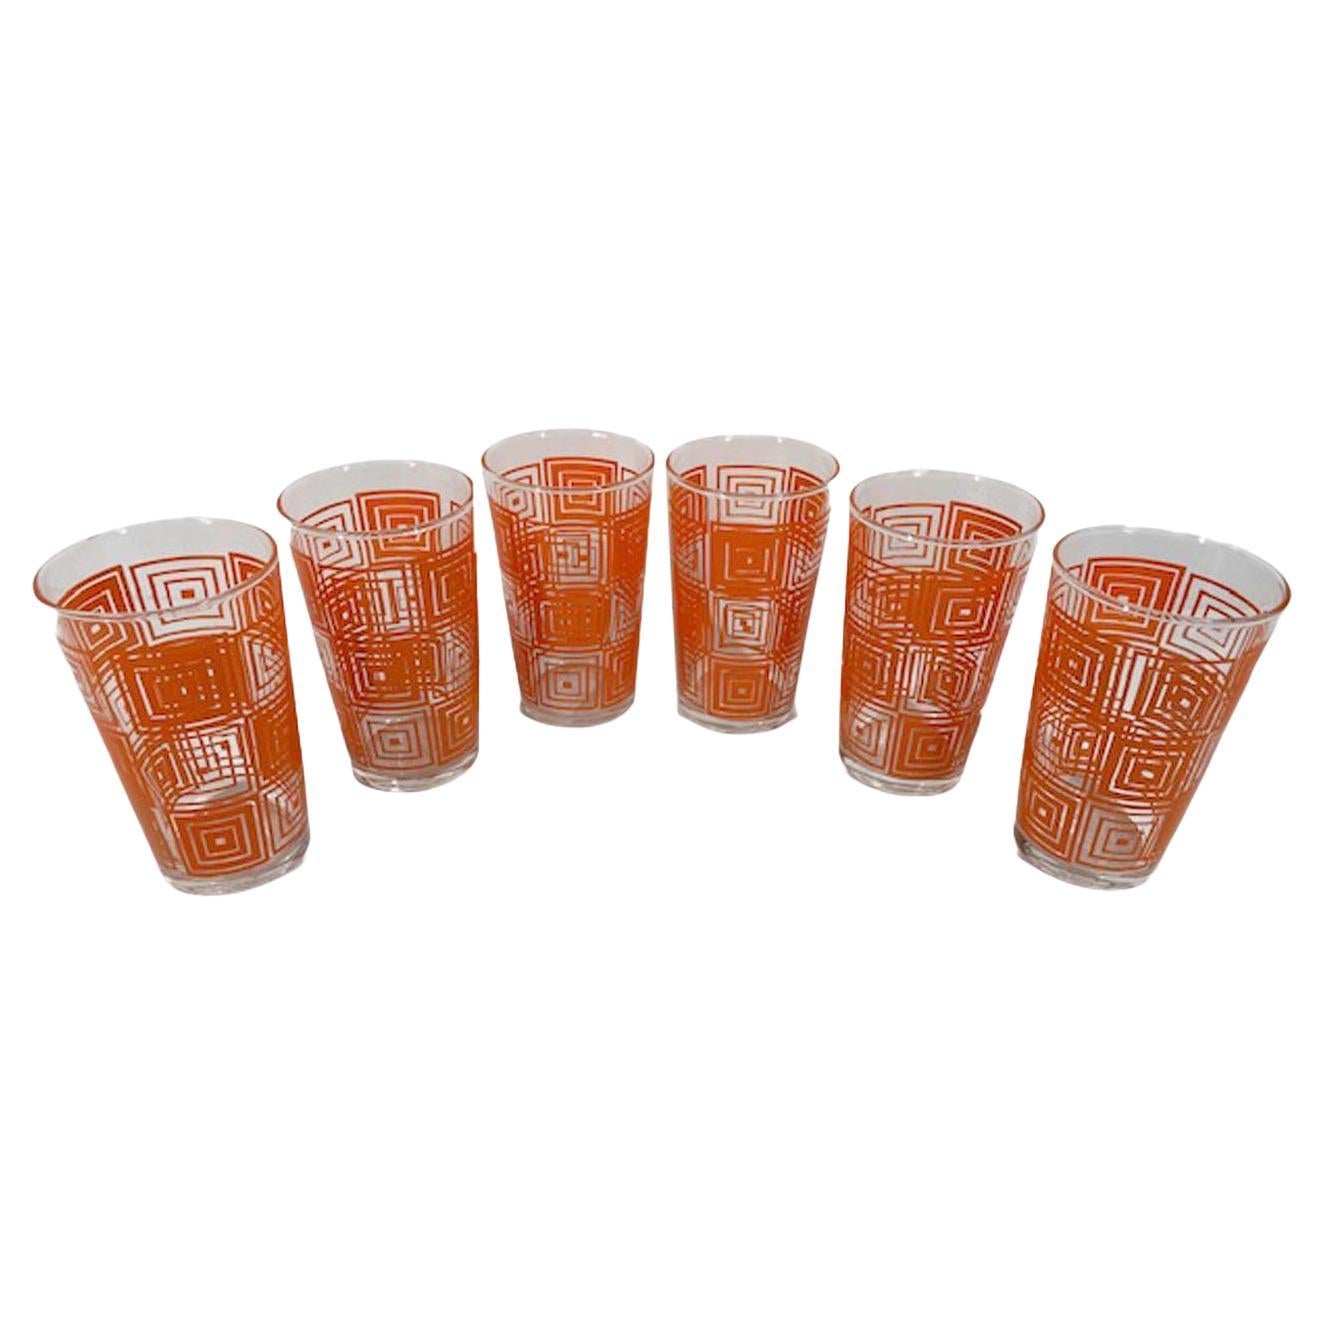 Six Vintage Federal Glassware Tumblers with Concentric Squares in Orange Enamel For Sale